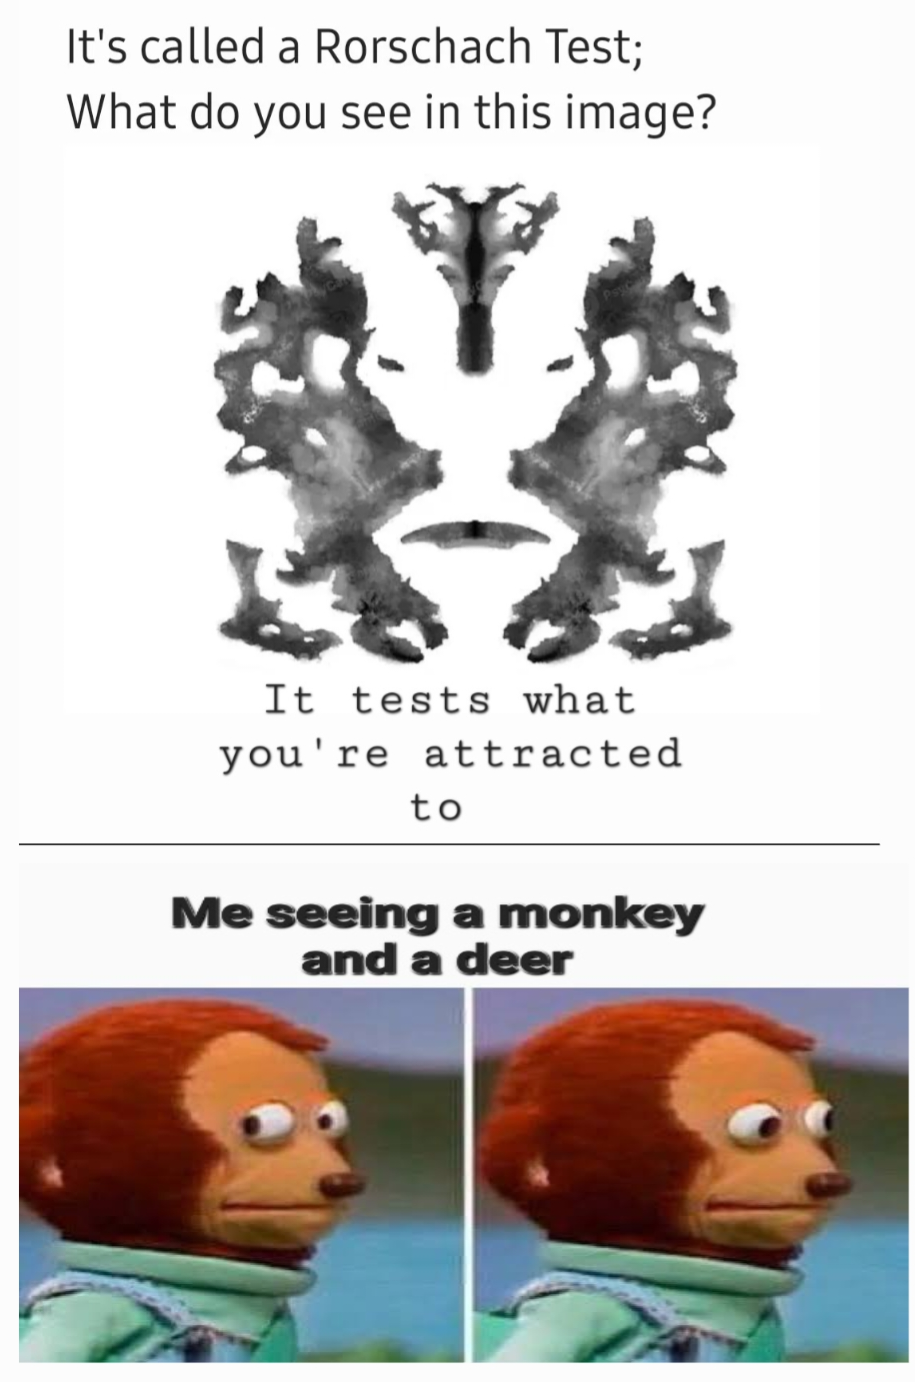 dank memes - rorschach teszt - It's called a Rorschach Test; What do you see in this image? It tests what you're attracted to Me seeing a monkey and a deer